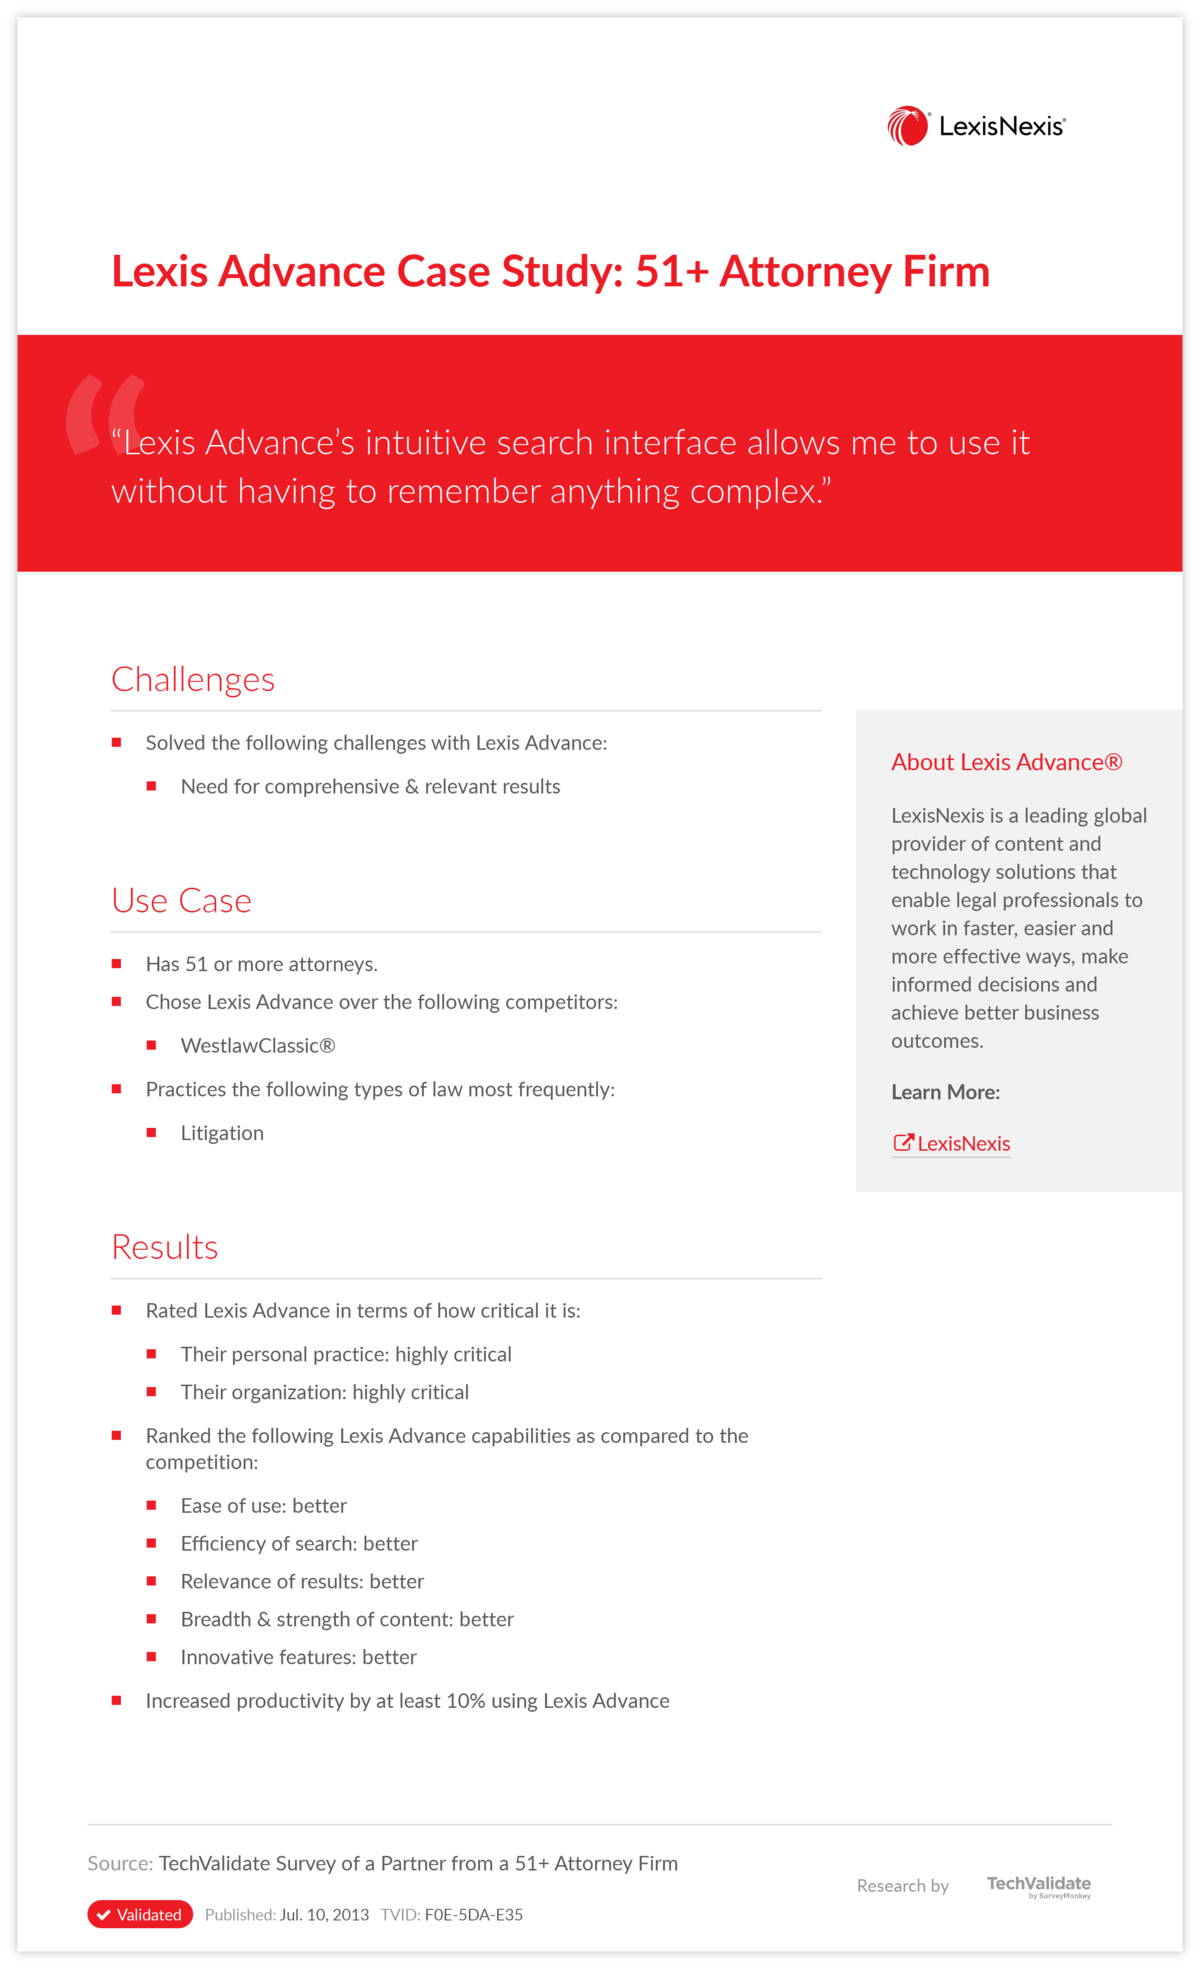 Lexis Advance Case Study: 51+ Attorney Firm